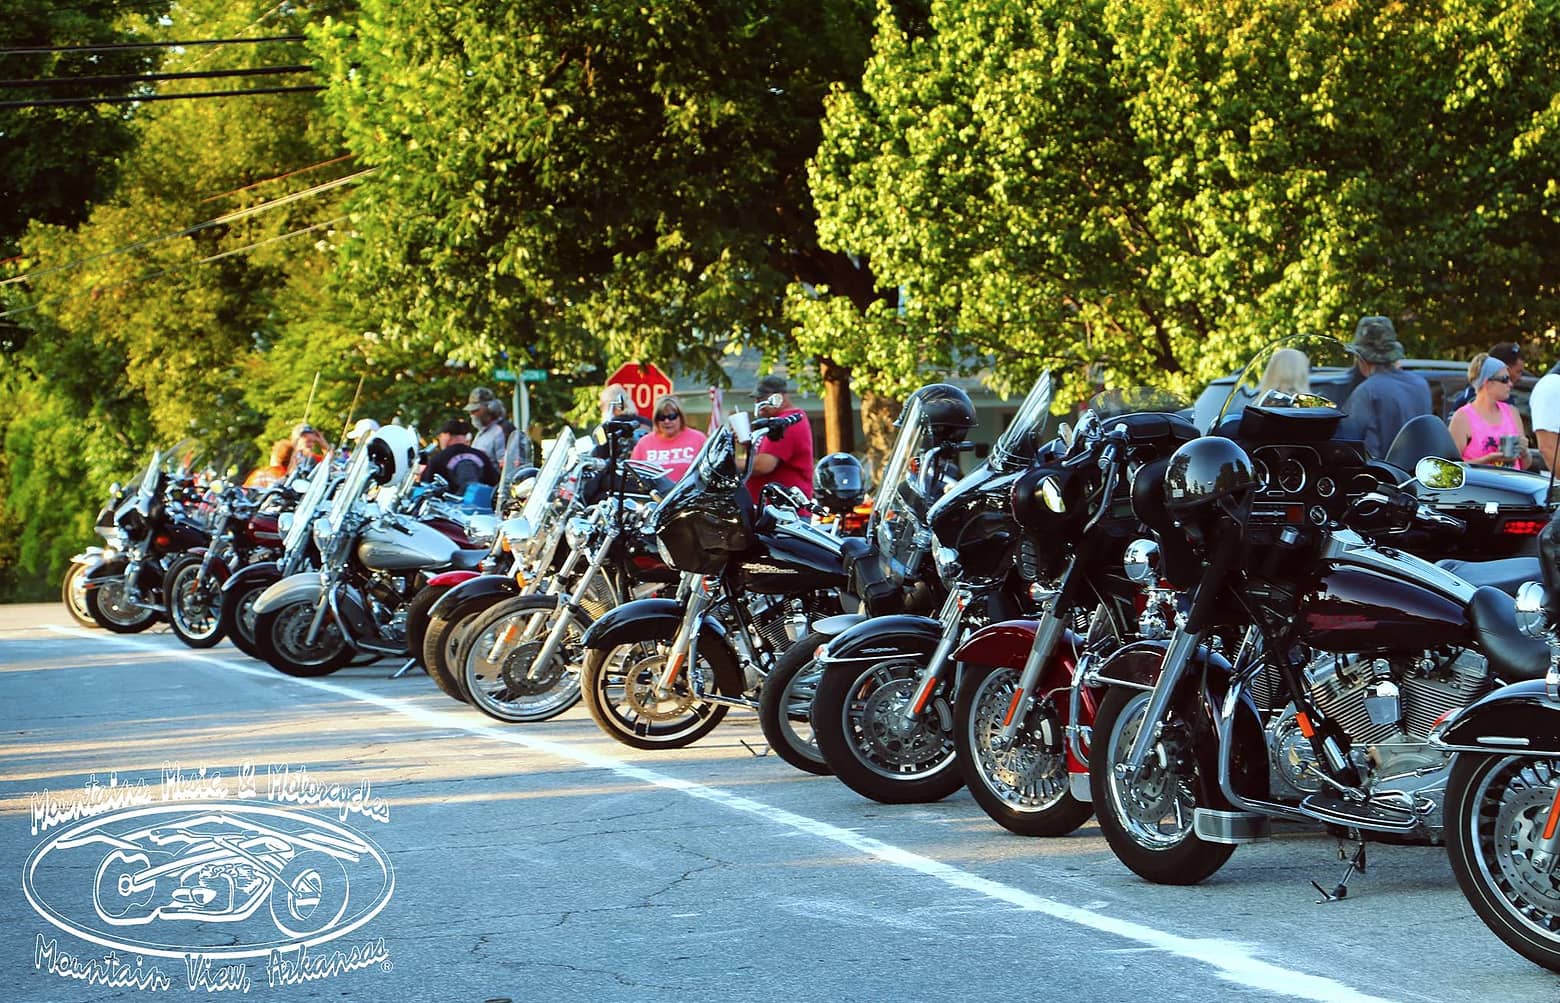 The 17th annual Mountains, Music, and Motorcycles is this weekend